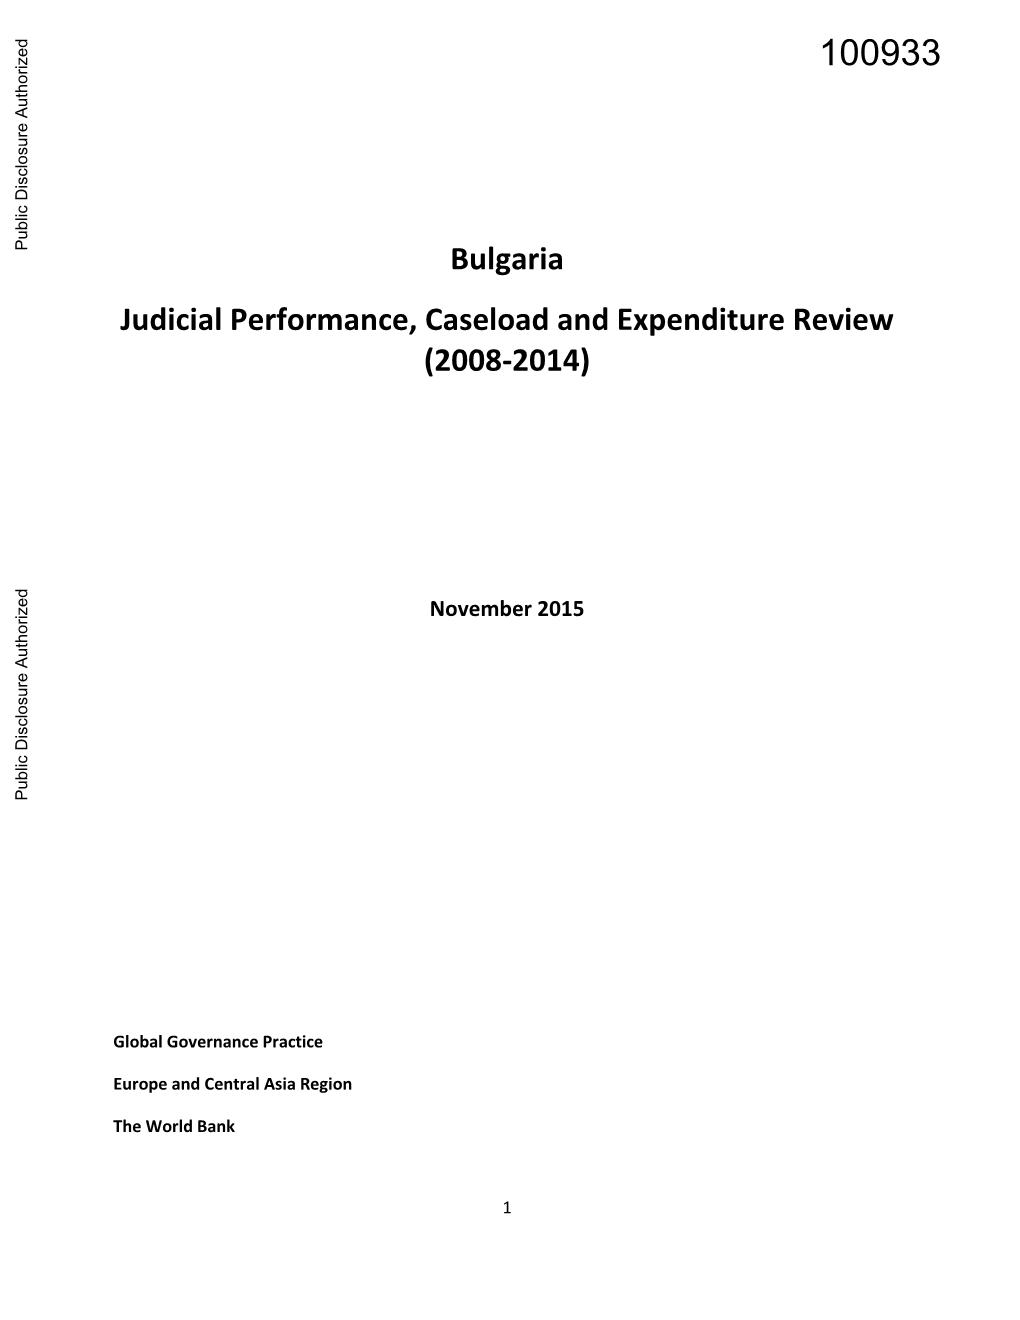 Bulgaria Judicial Performance, Caseload and Expenditure Review (2008-2014)